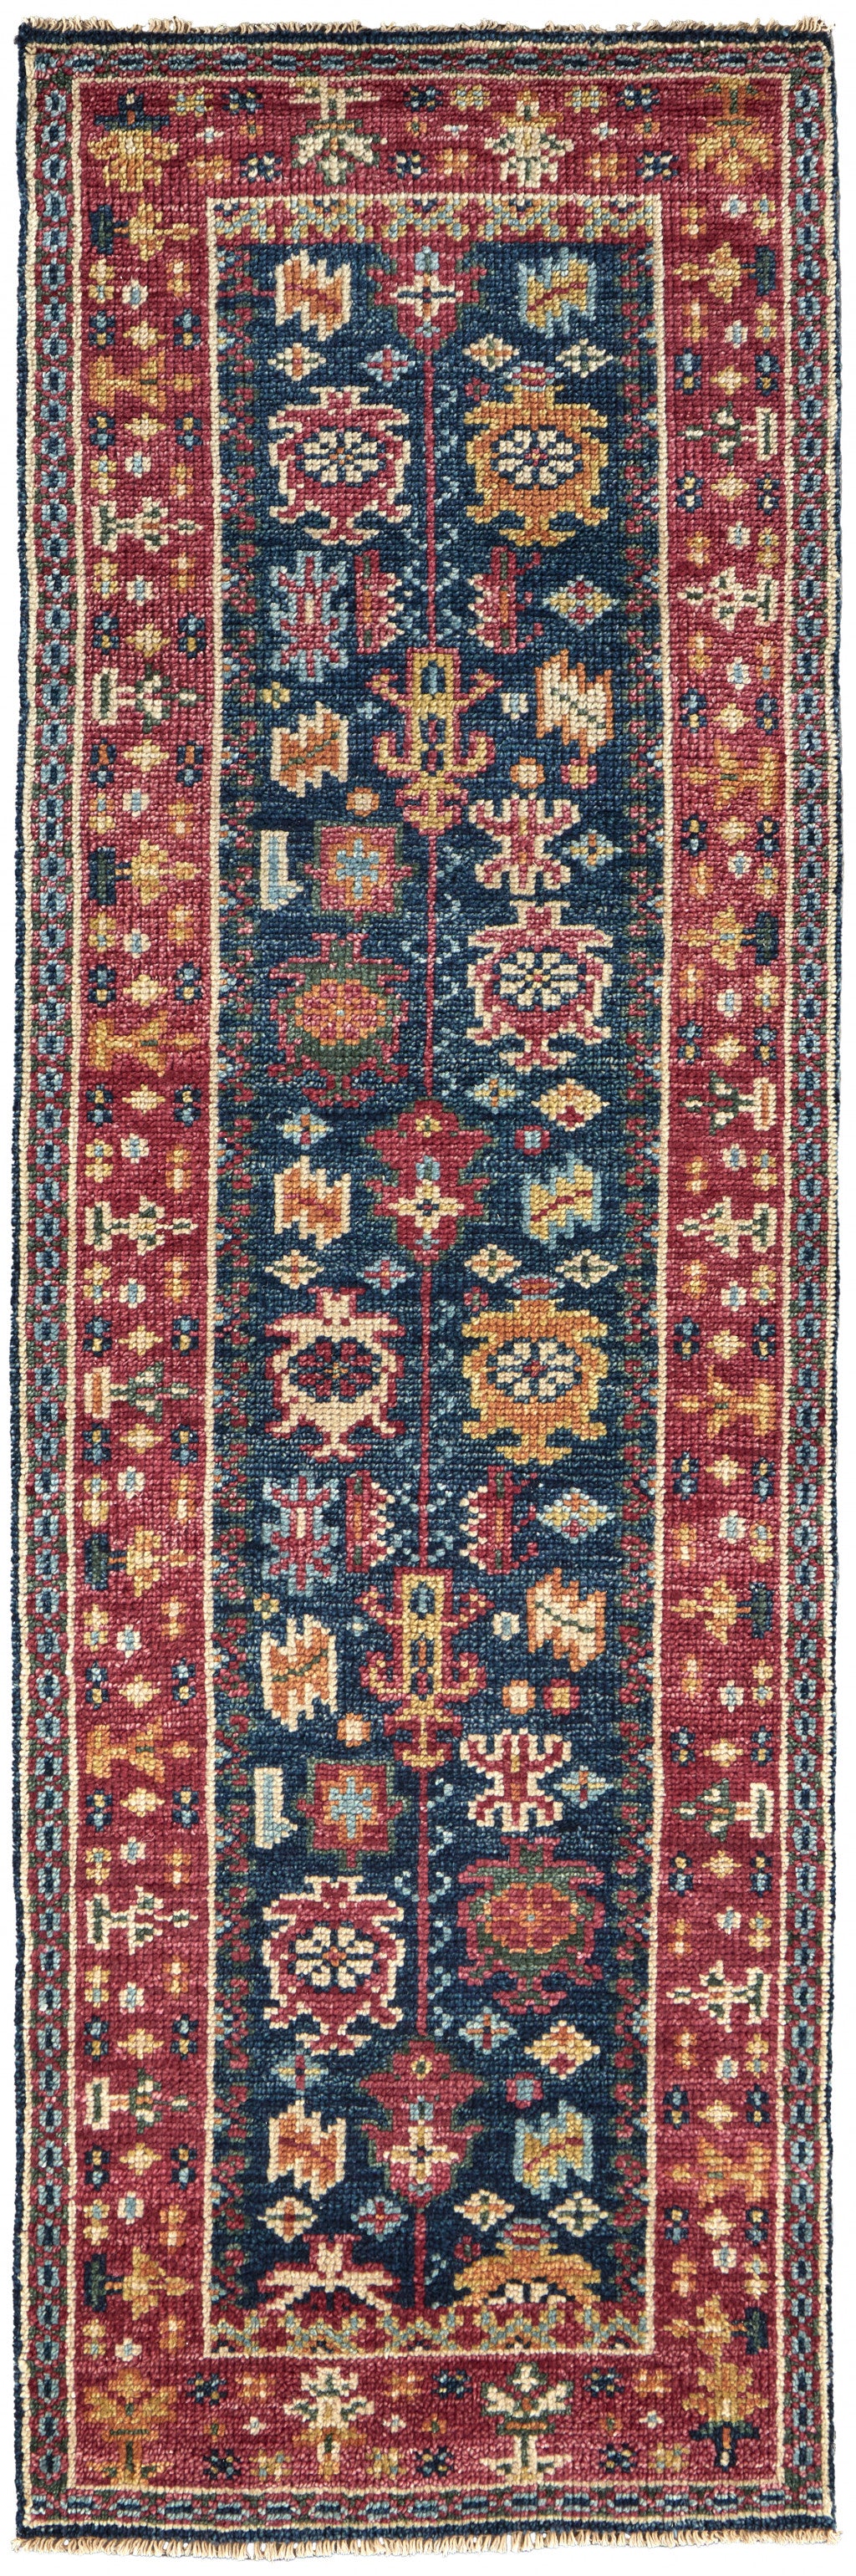 8' Pink Blue And Orange Wool Floral Hand Knotted Distressed Stain Resistant Runner Rug With Fringe